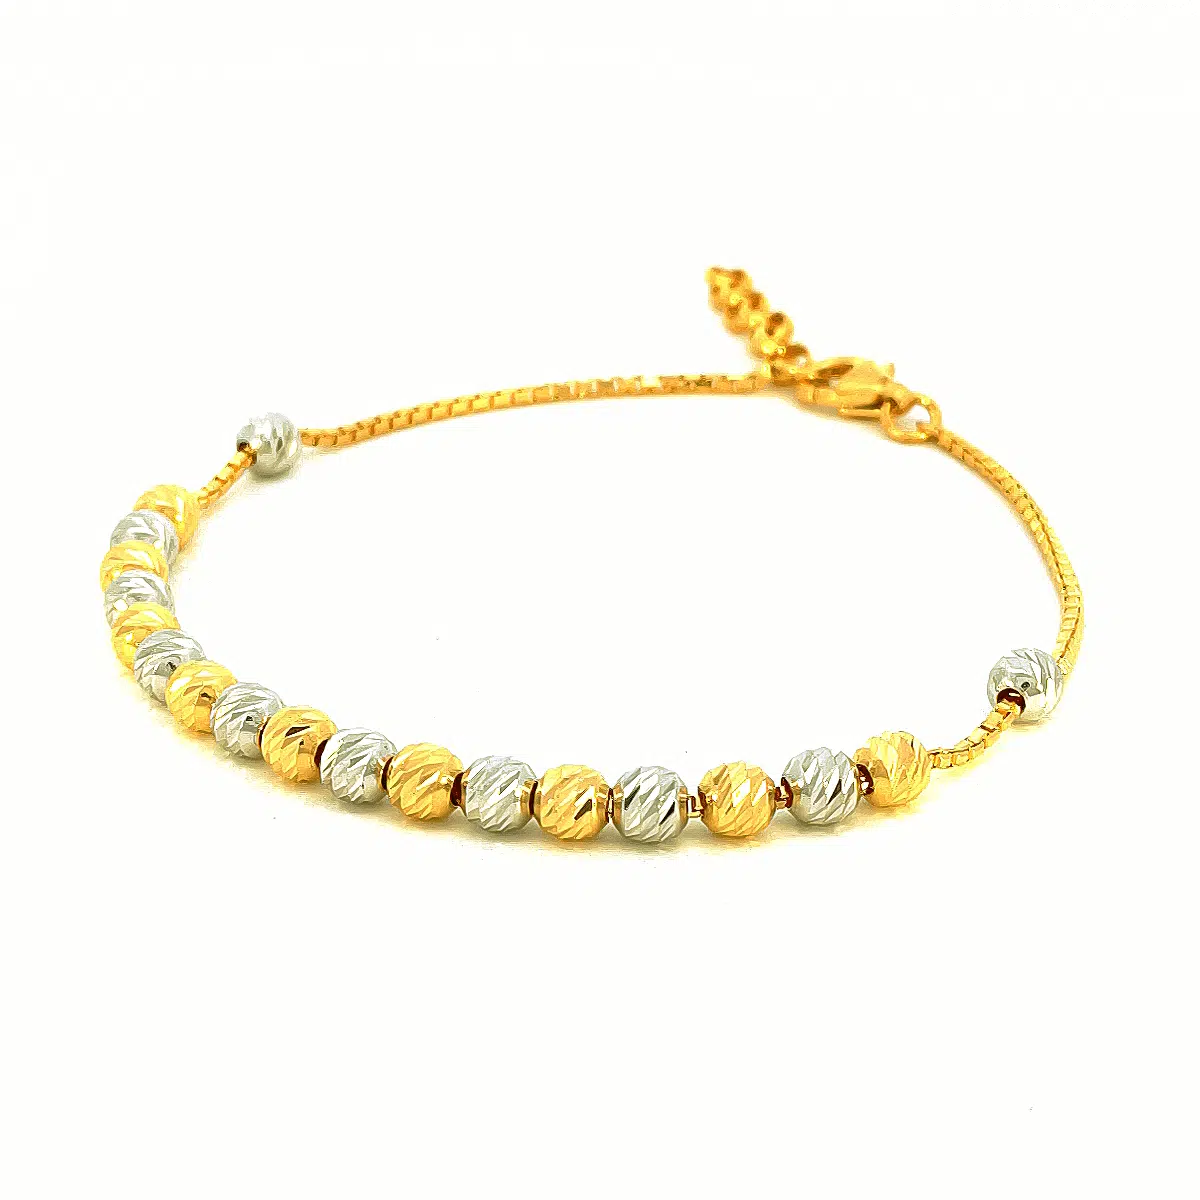 SK BRACELET FOR WOMEN TALIA threaded with duotone faceted-cut beads and is a minimalistic piece on a different angle